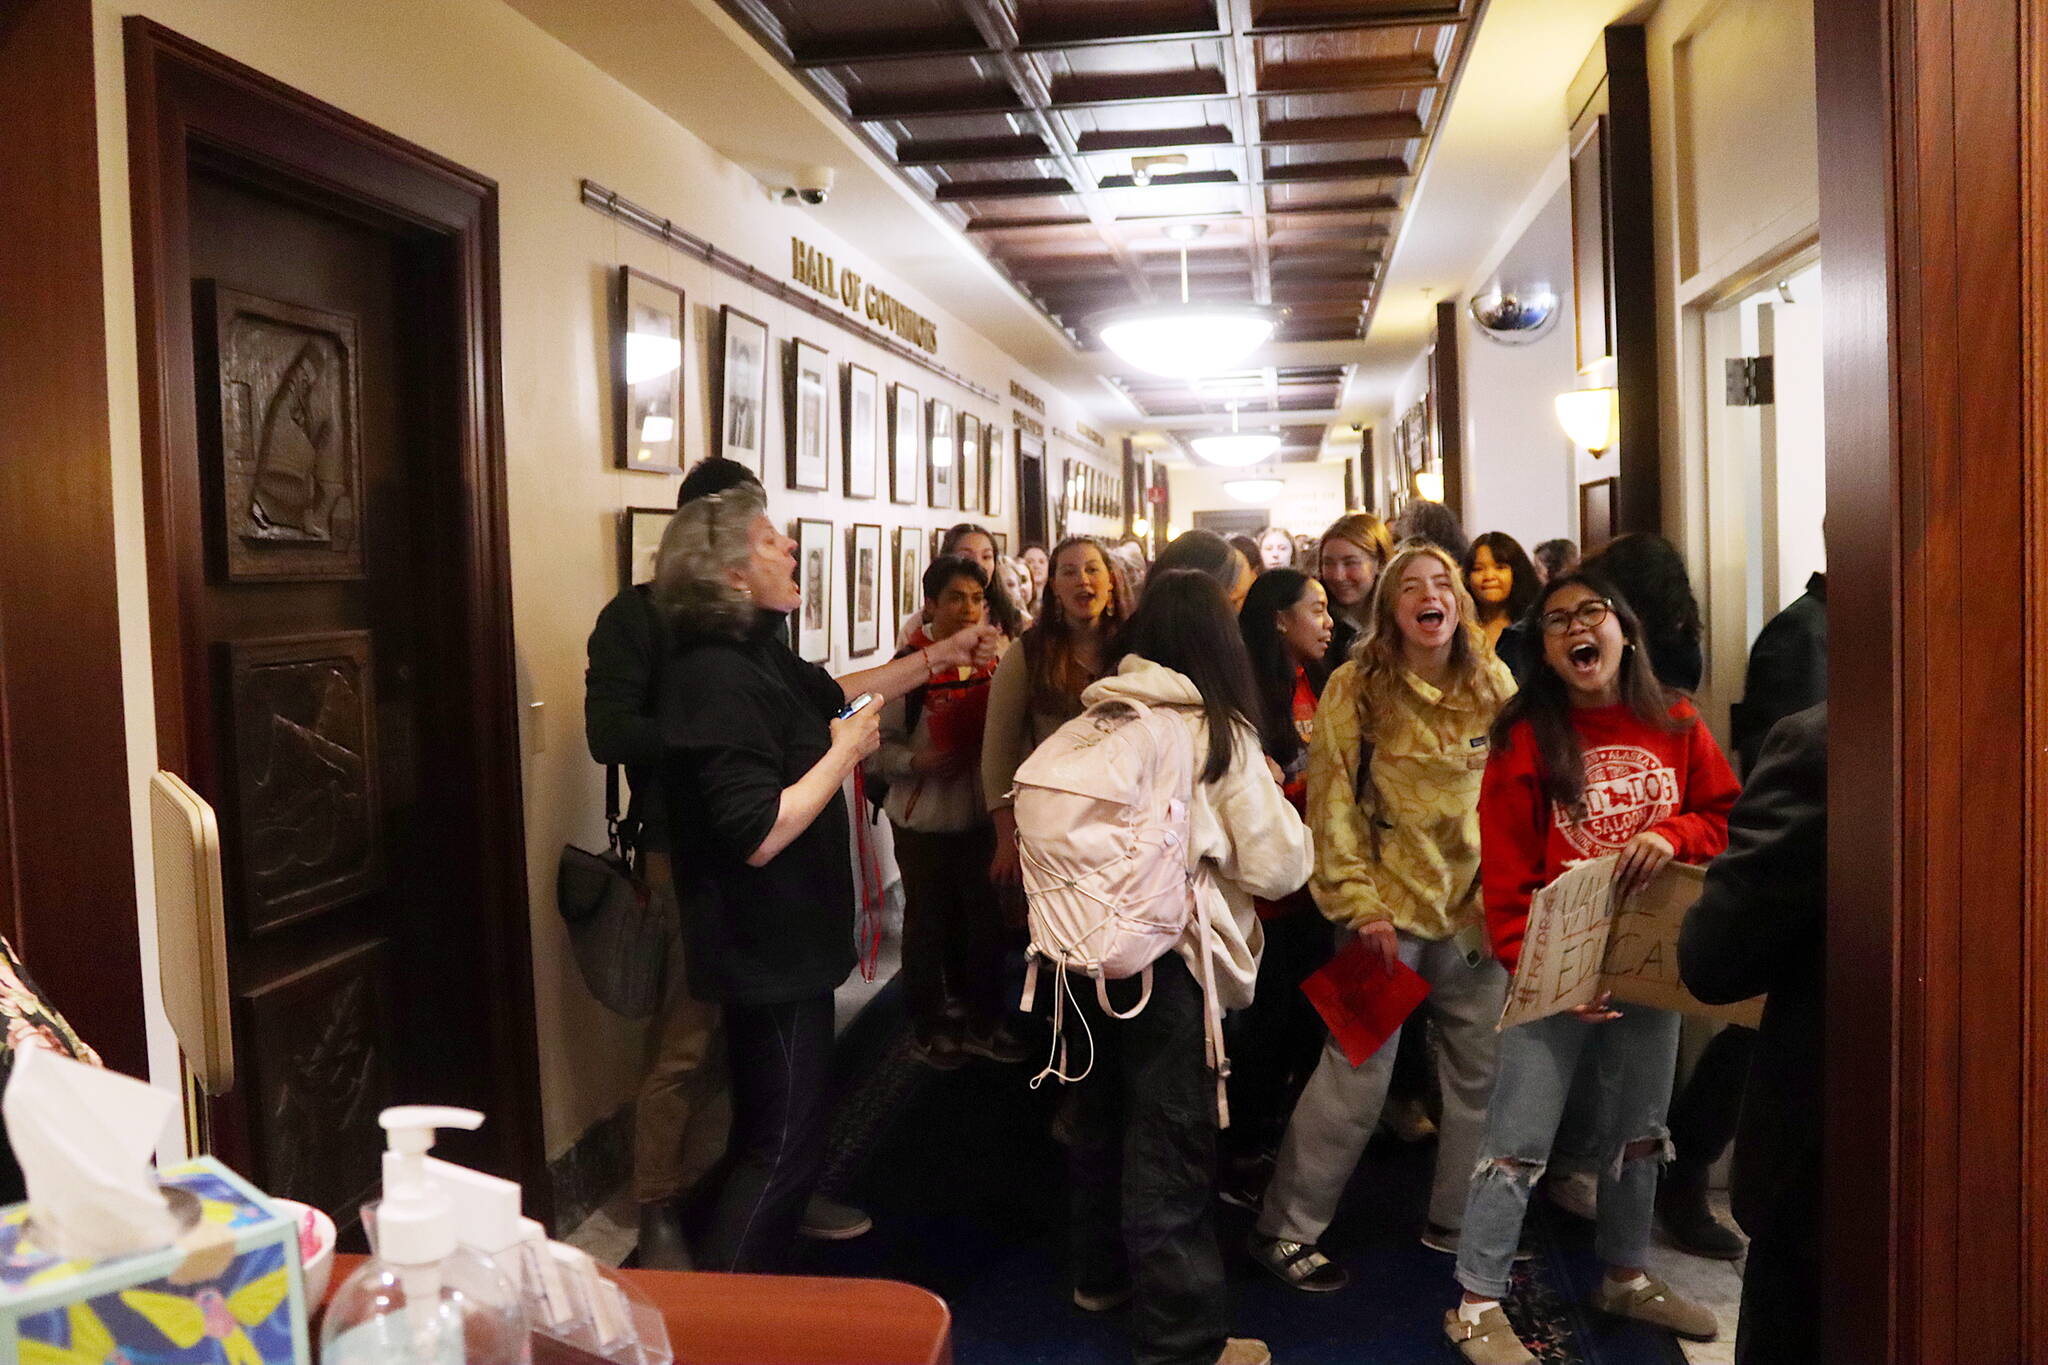 Juneau students chant outside the governor’s office on the third floor of the Alaska State Capitol during a statewide protest Thursday morning calling for more public education funding. (Mark Sabbatini / Juneau Empire)